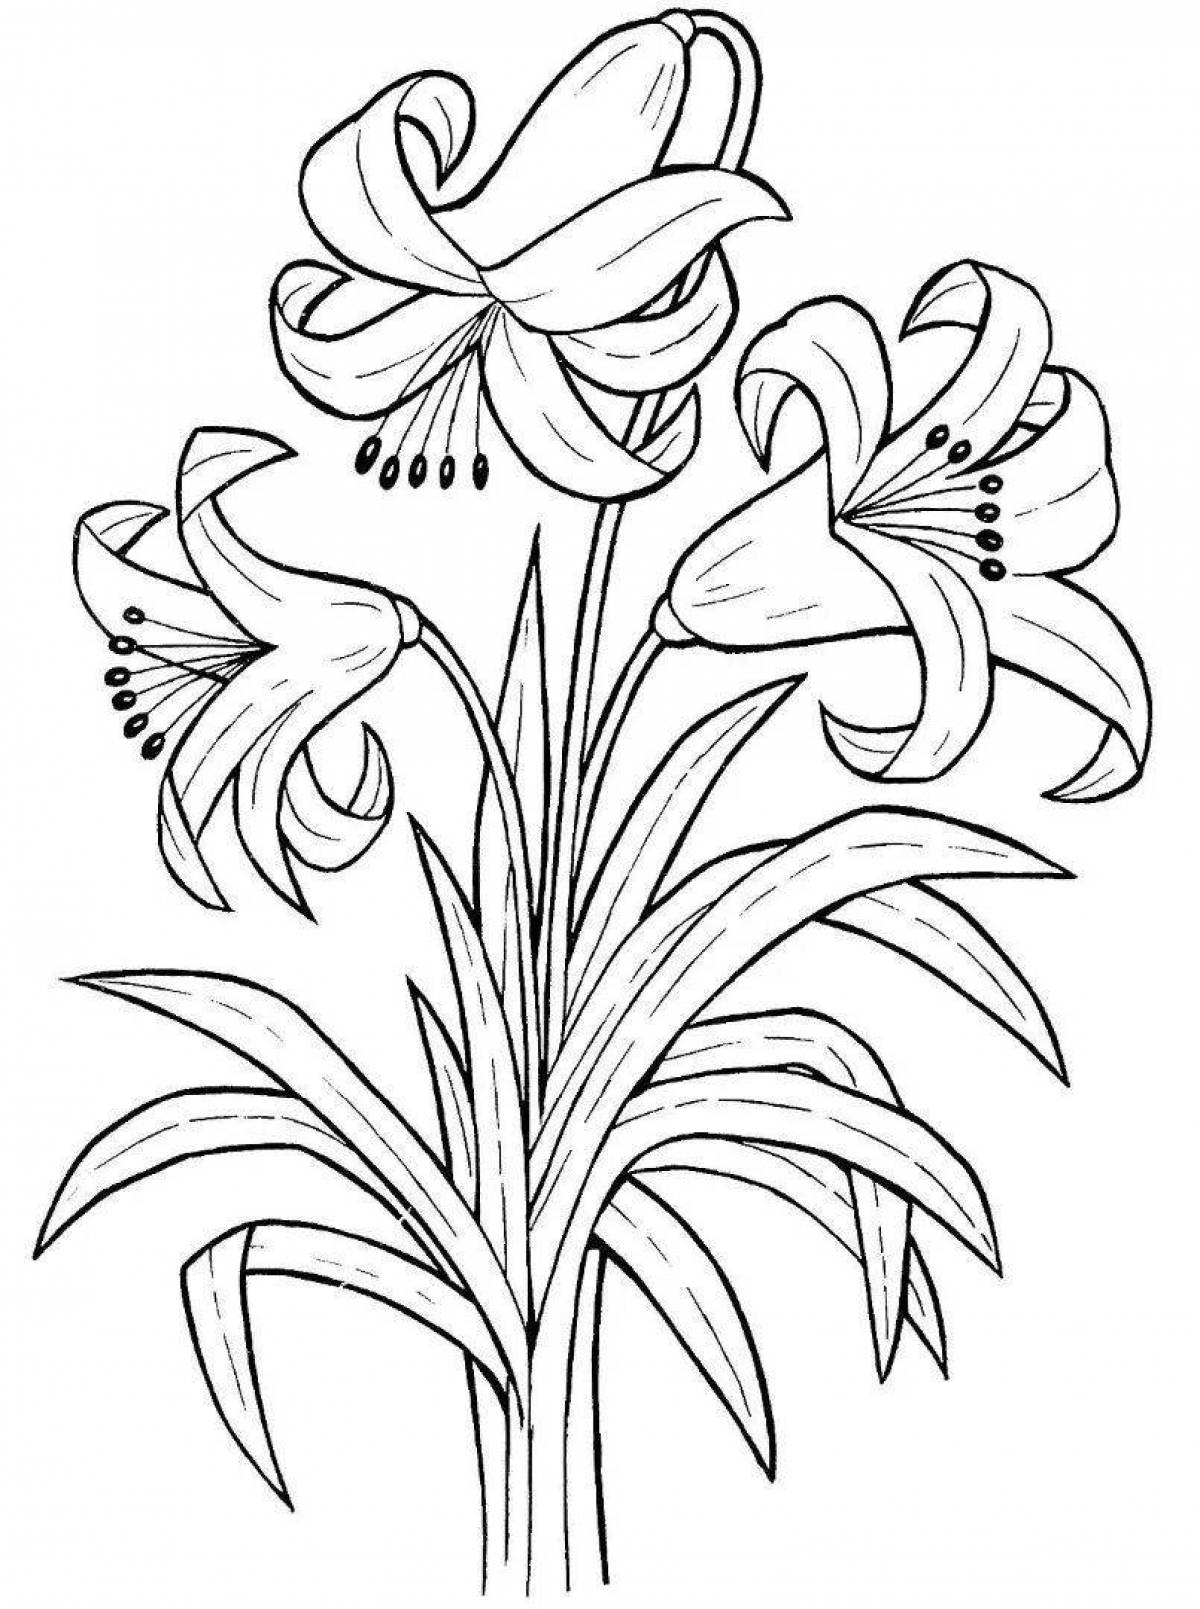 Colored luminous garden flowers coloring book